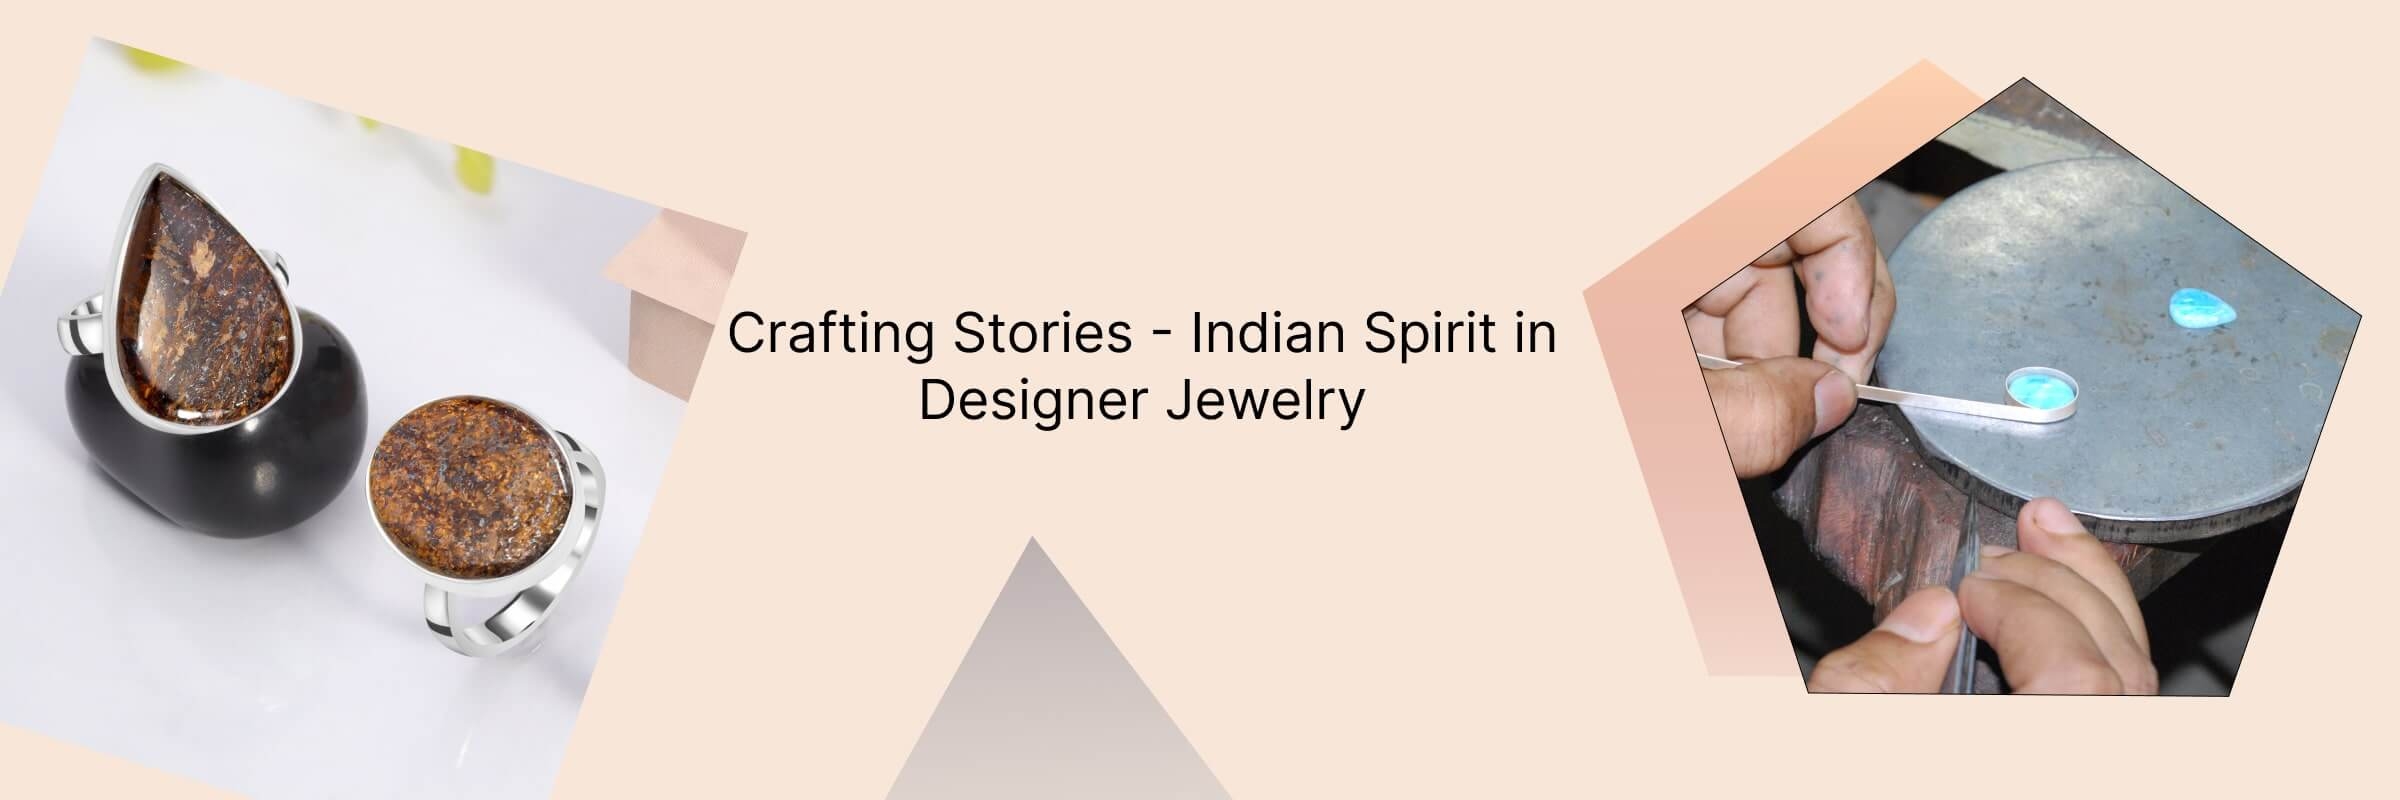 Custom and Designer Jewelry with Indian Essence